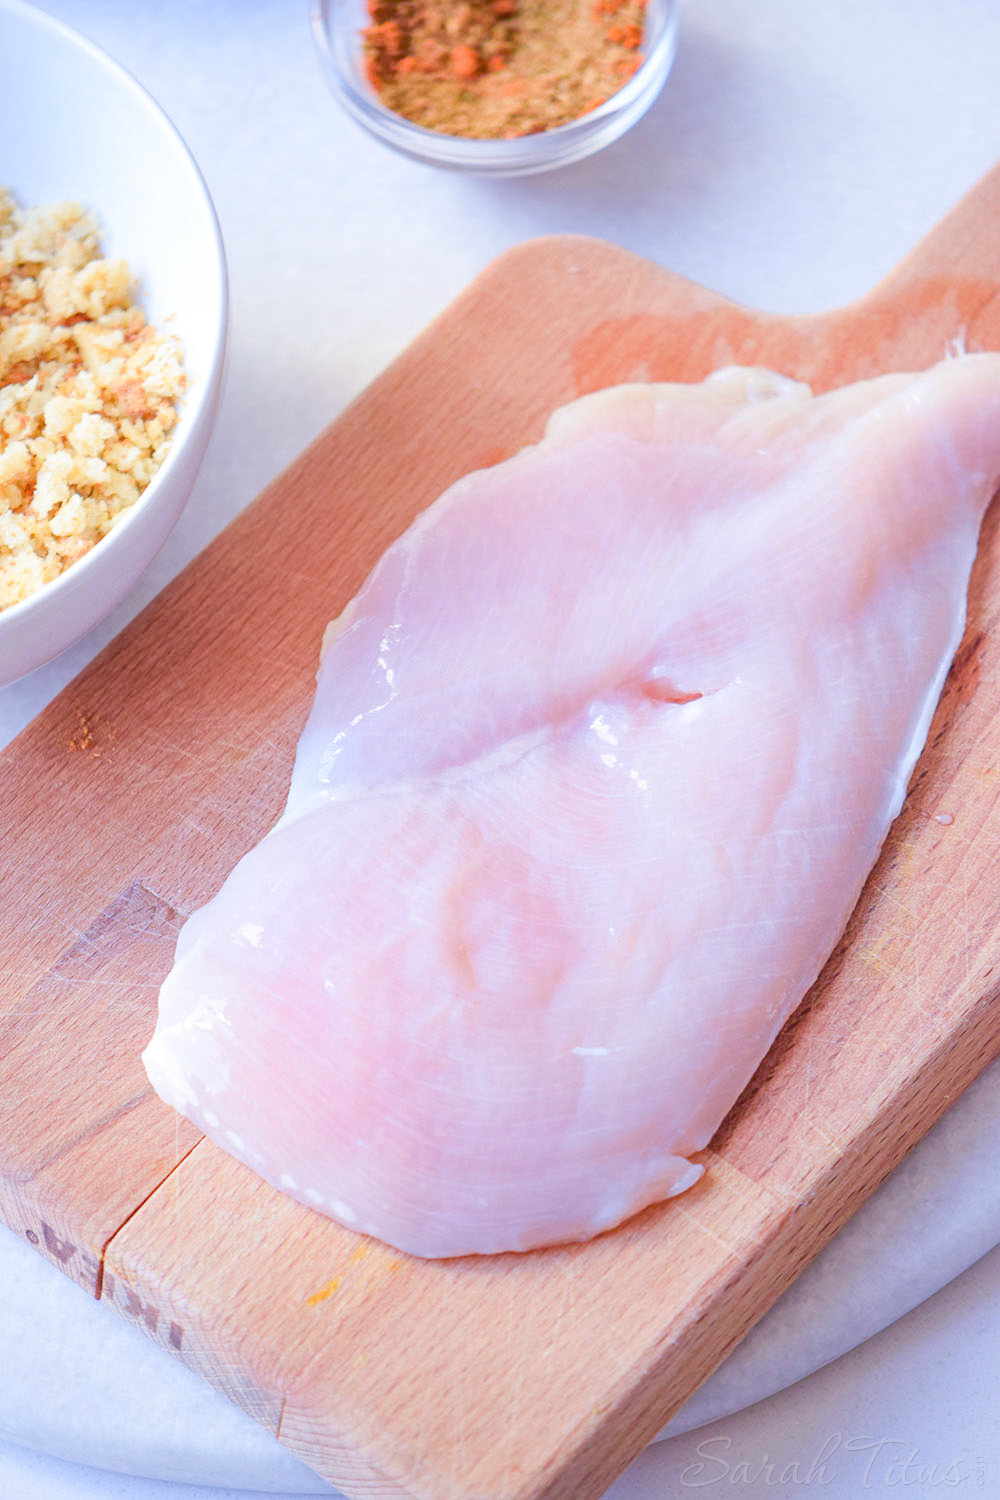 Large chicken breast on a cutting board with seasonings in bowls on the side